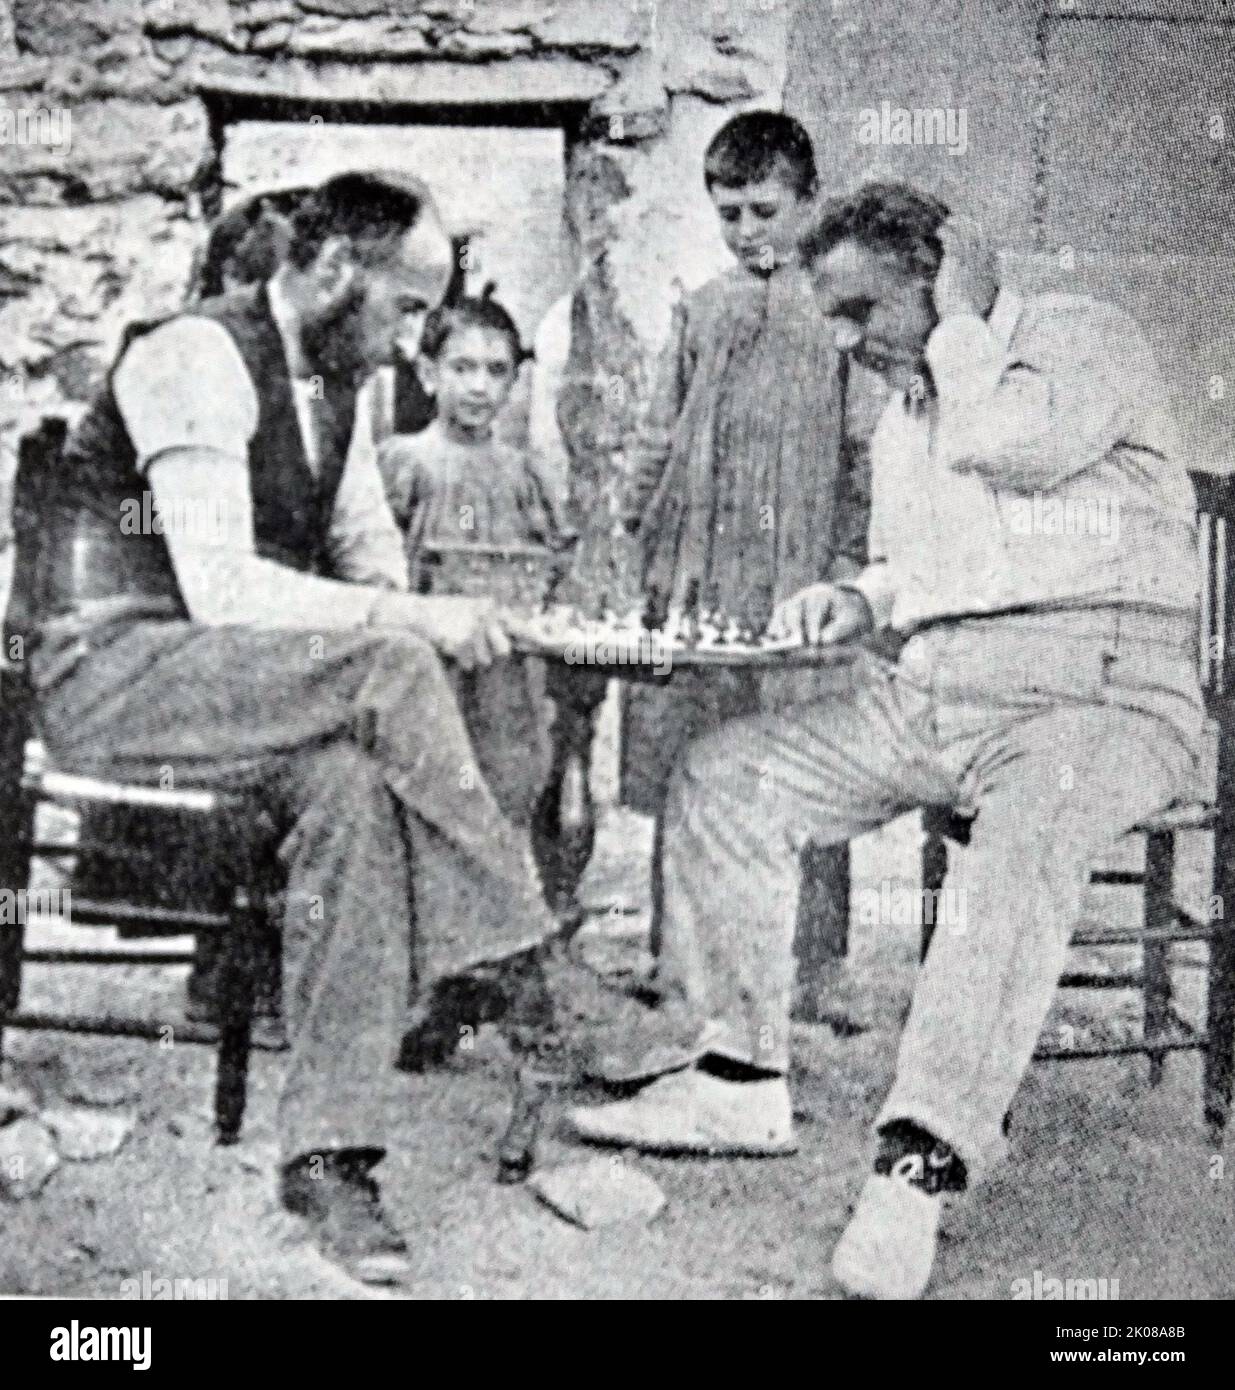 Santiago Ramon y Cajal with Doctor Don Federico Oloriz in Madrid. Santiago Ramon y Cajal (1 May 1852 - 17 October 1934) was a Spanish neuroscientist, pathologist, and histologist specializing in neuroanatomy and the central nervous system. Doctor Don Federico Oloriz (1855 - 1912) was a physician, specialist in anatomy, physical anthropology, criminology Stock Photo